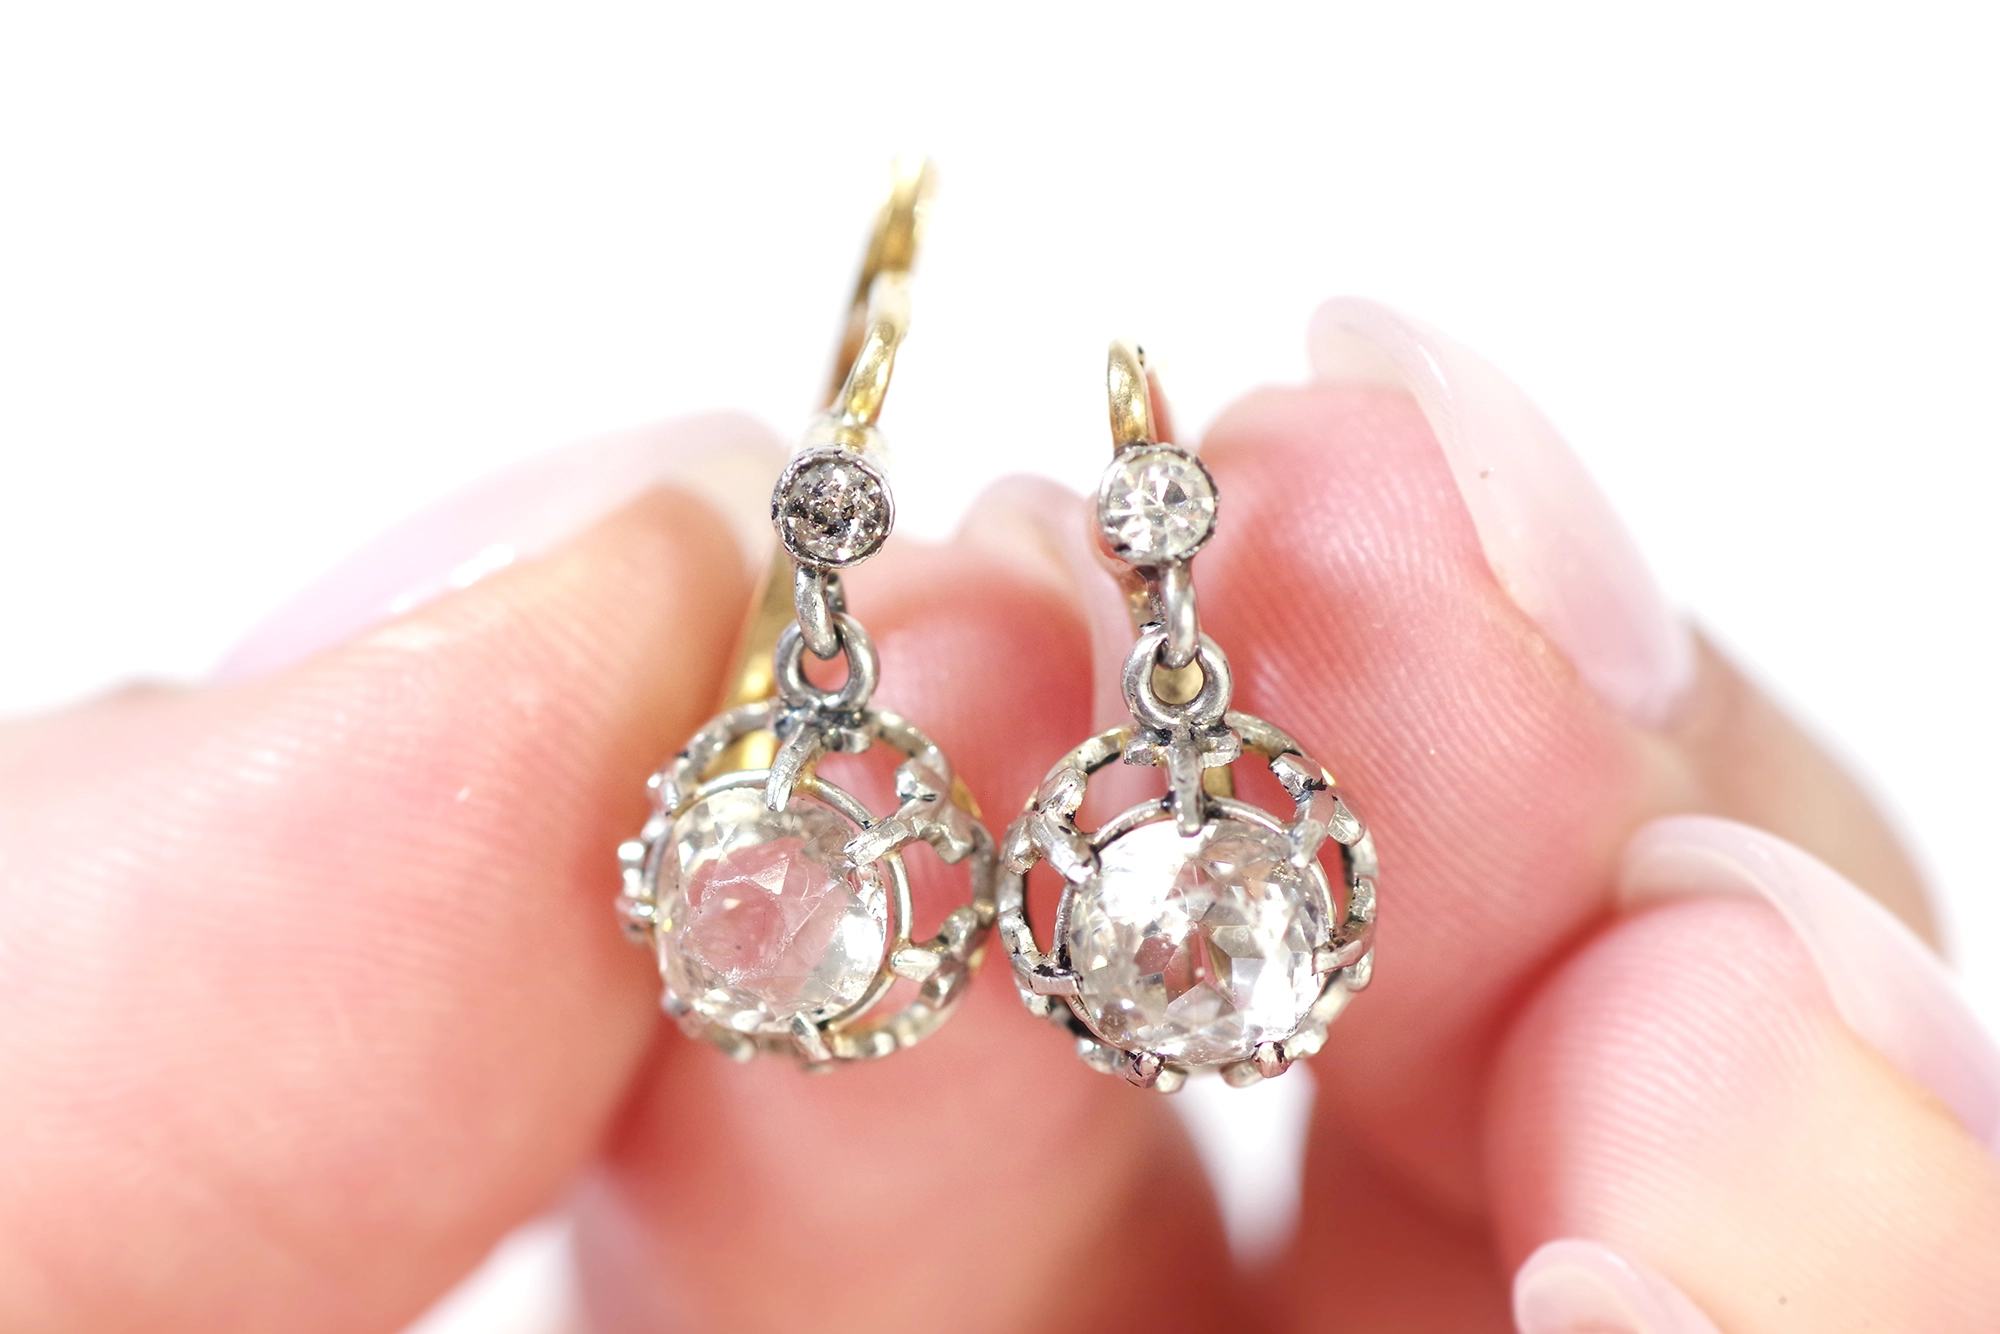 Vintage Platinum, White Gold And Diamonds Earrings. - 2 Pieces | Chairish